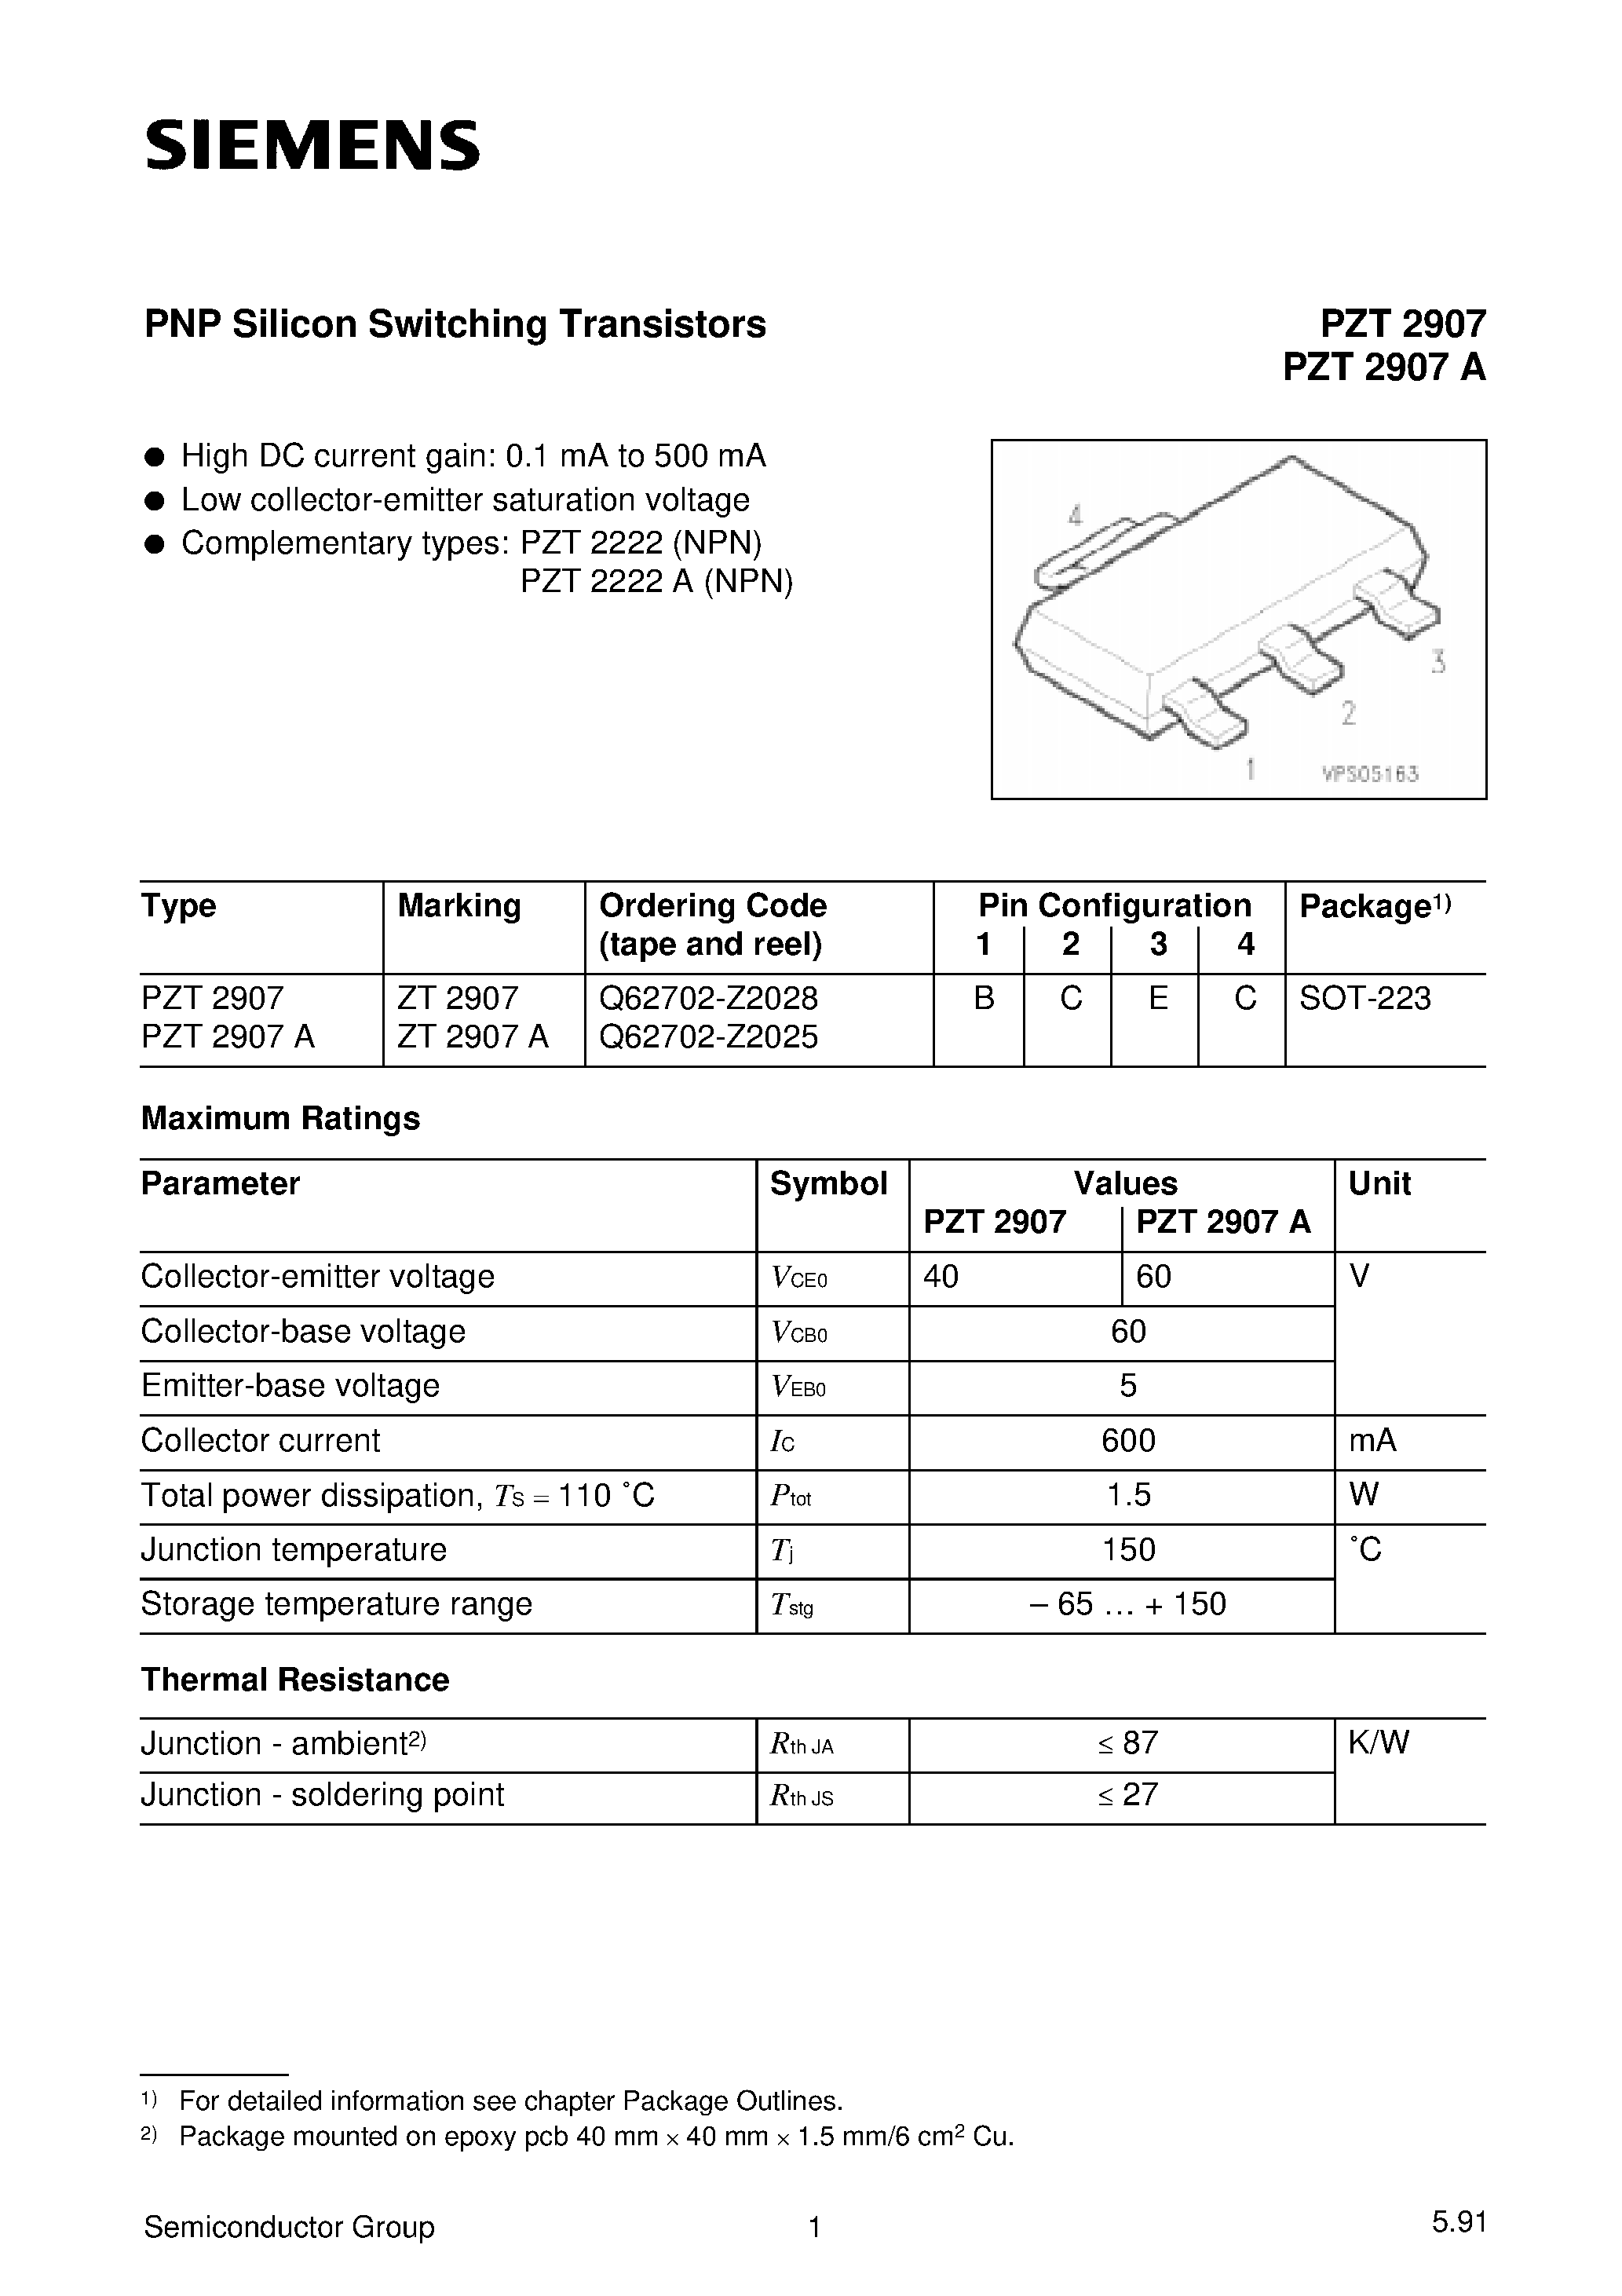 Datasheet PZT2907A - PNP Silicon Switching Transistors page 1